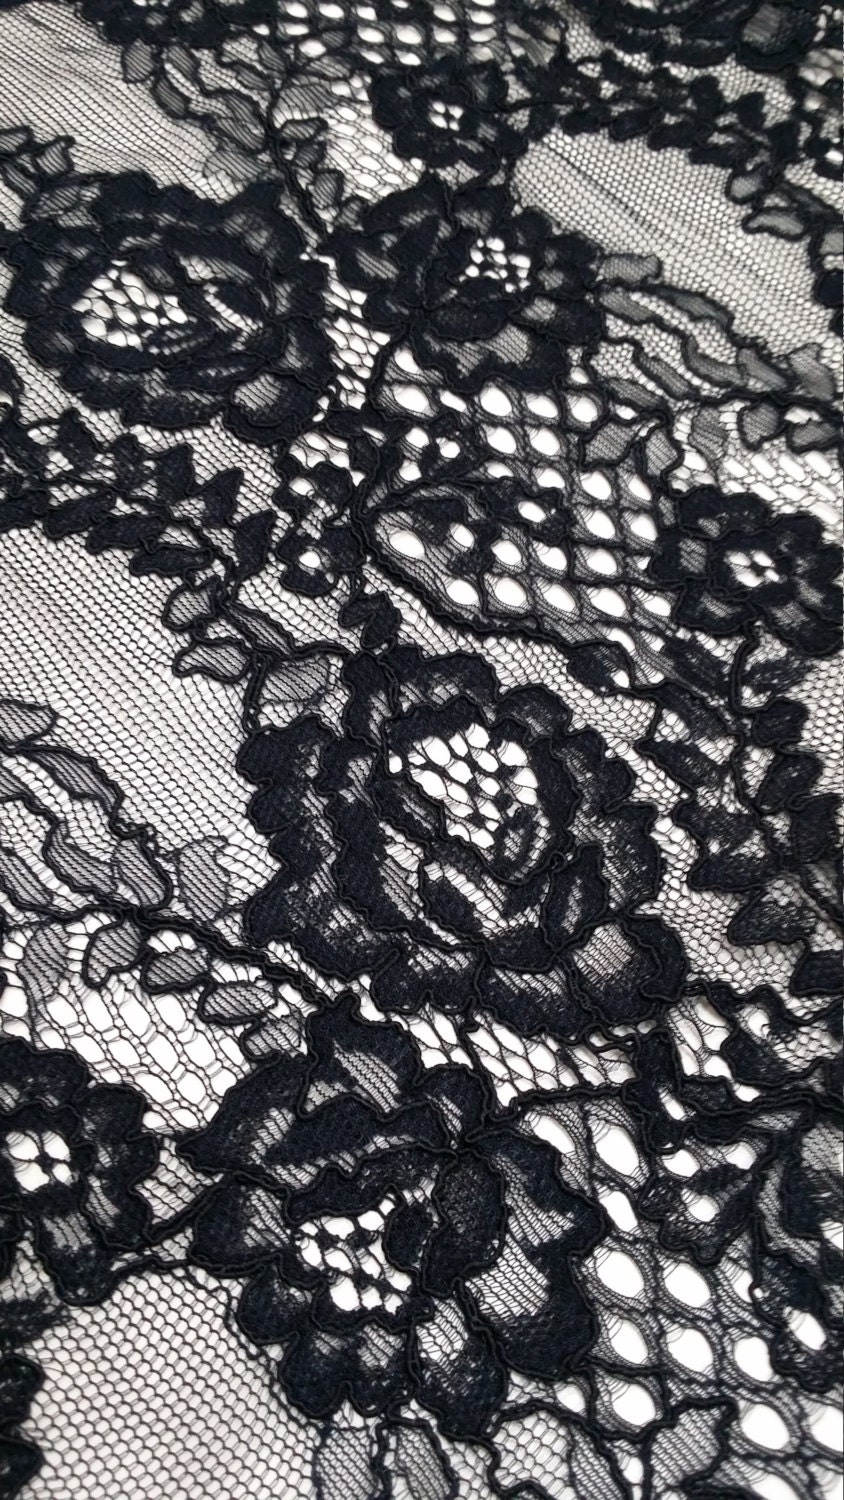 Black Lace Fabric by the Yard France Lace L75752 | Etsy